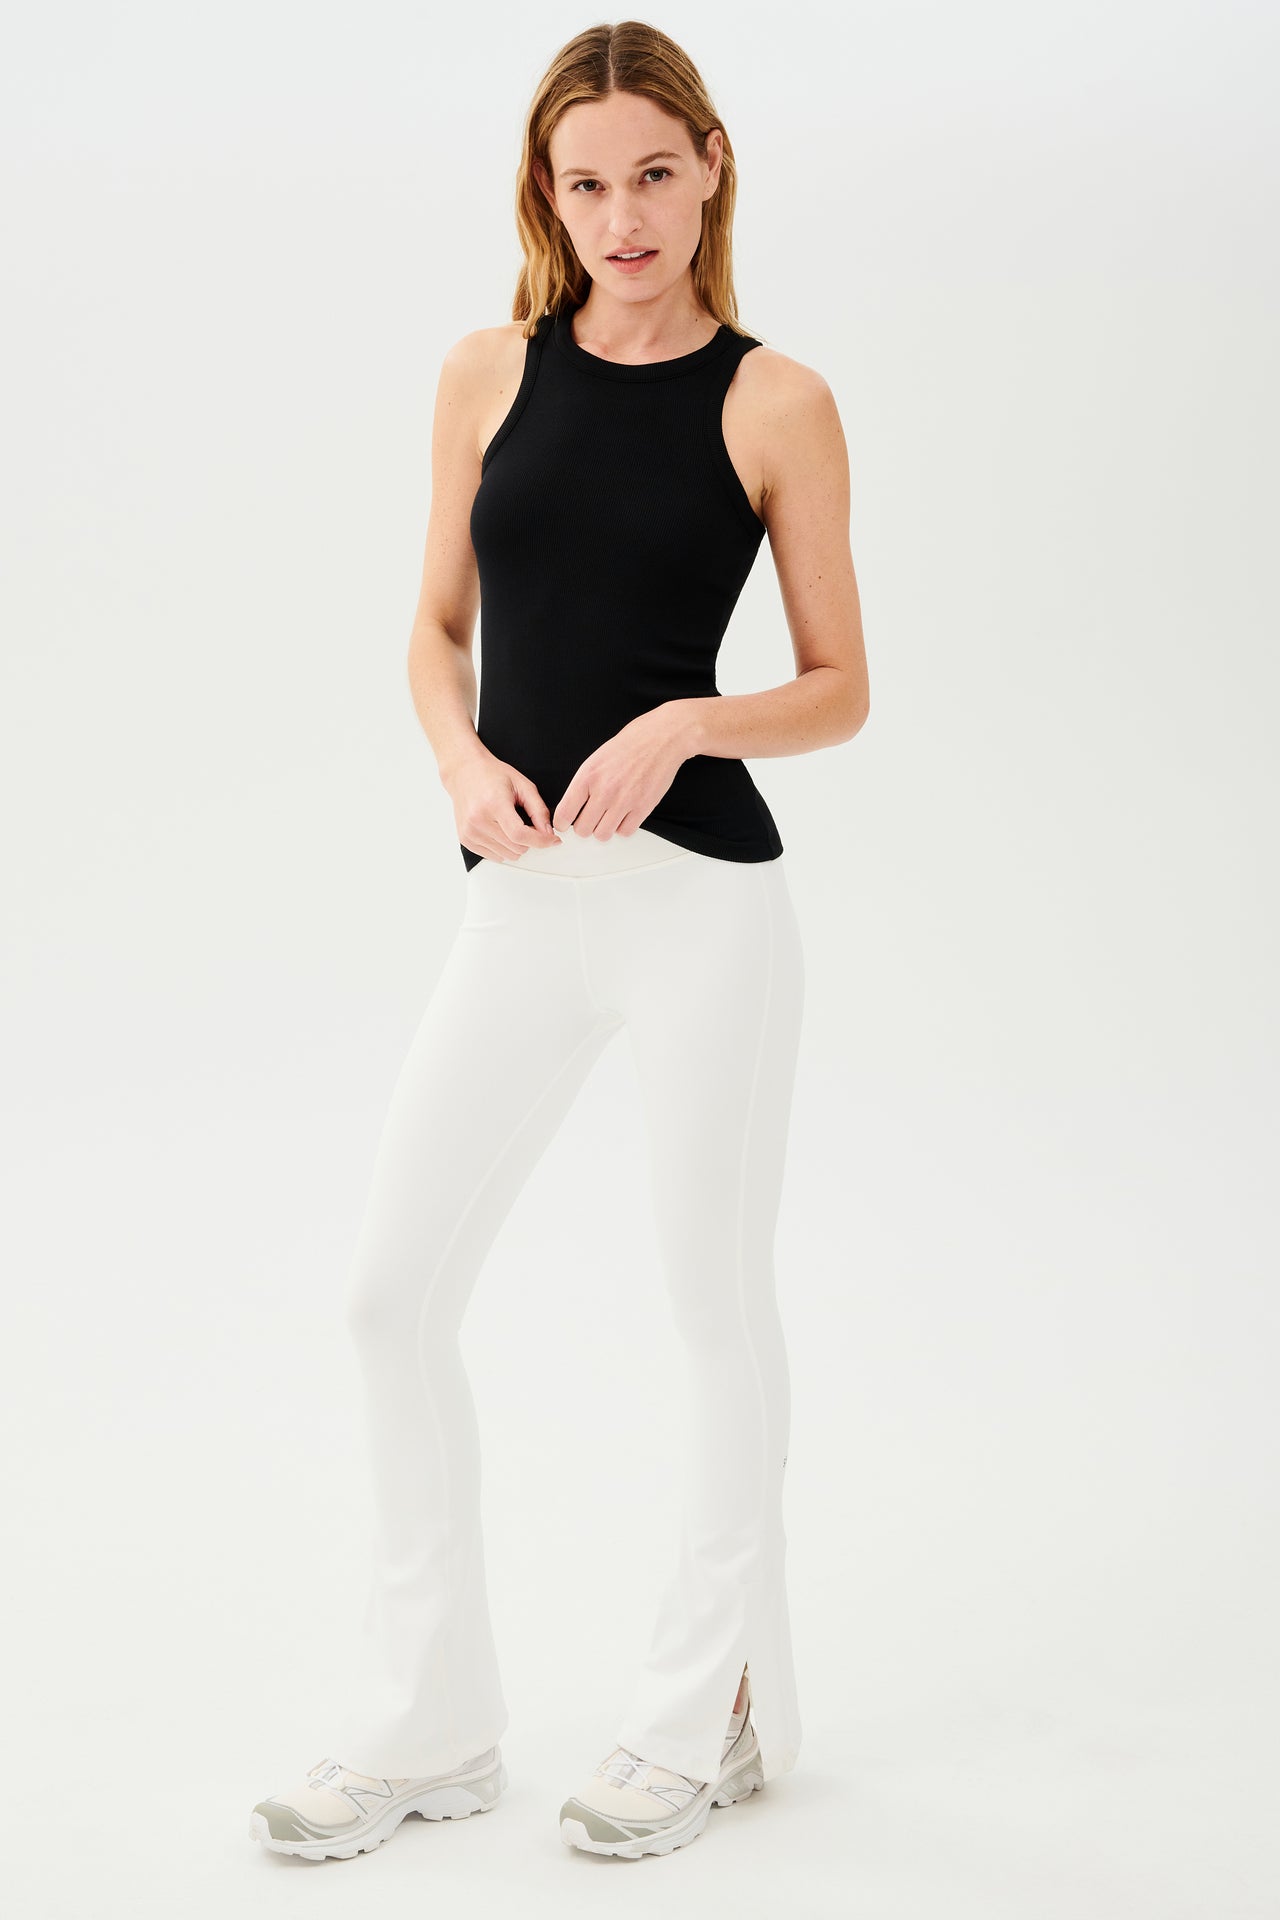 Full front view of woman with blonde straight hair wearing white high waist below ankle length legging with wide flared bottoms with split hem flare opening and black racerback tank top. Paired with white and gray shoes.